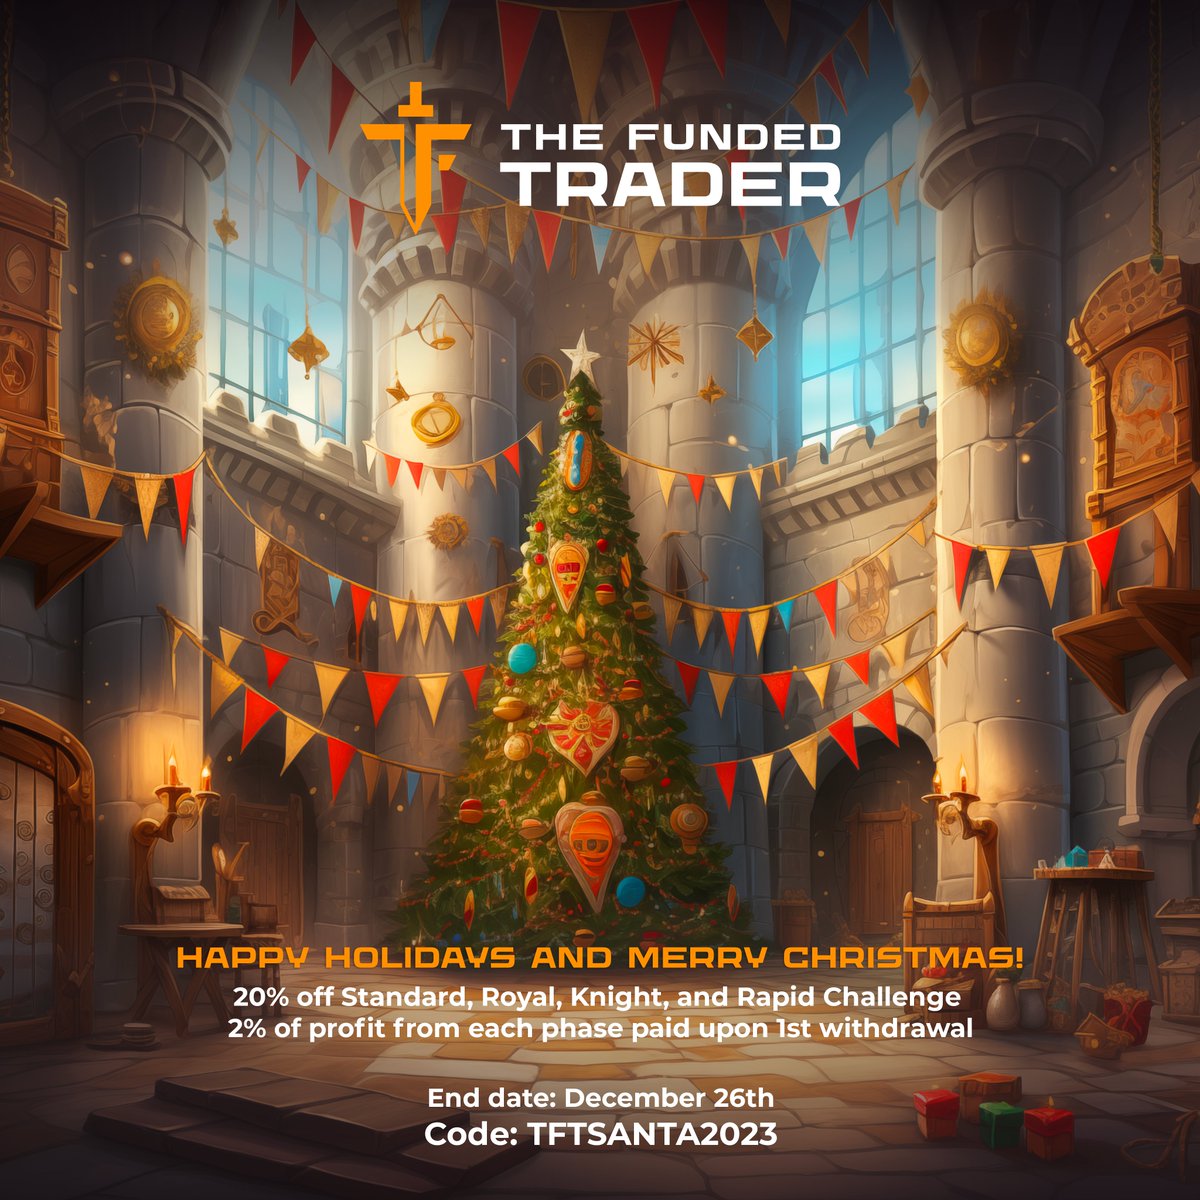 48 HOUR PROMOTIONS LIVE 🎄🎅 Rapid, Royal, Standard, Knight Only Terms: 20% off + 2% Bonus from each phase of the challenge (4% total for 2 phase) paid on first withdrawal End Date: December 26 midnight Code: TFTSANTA2023 Merry Christmas! 🎁